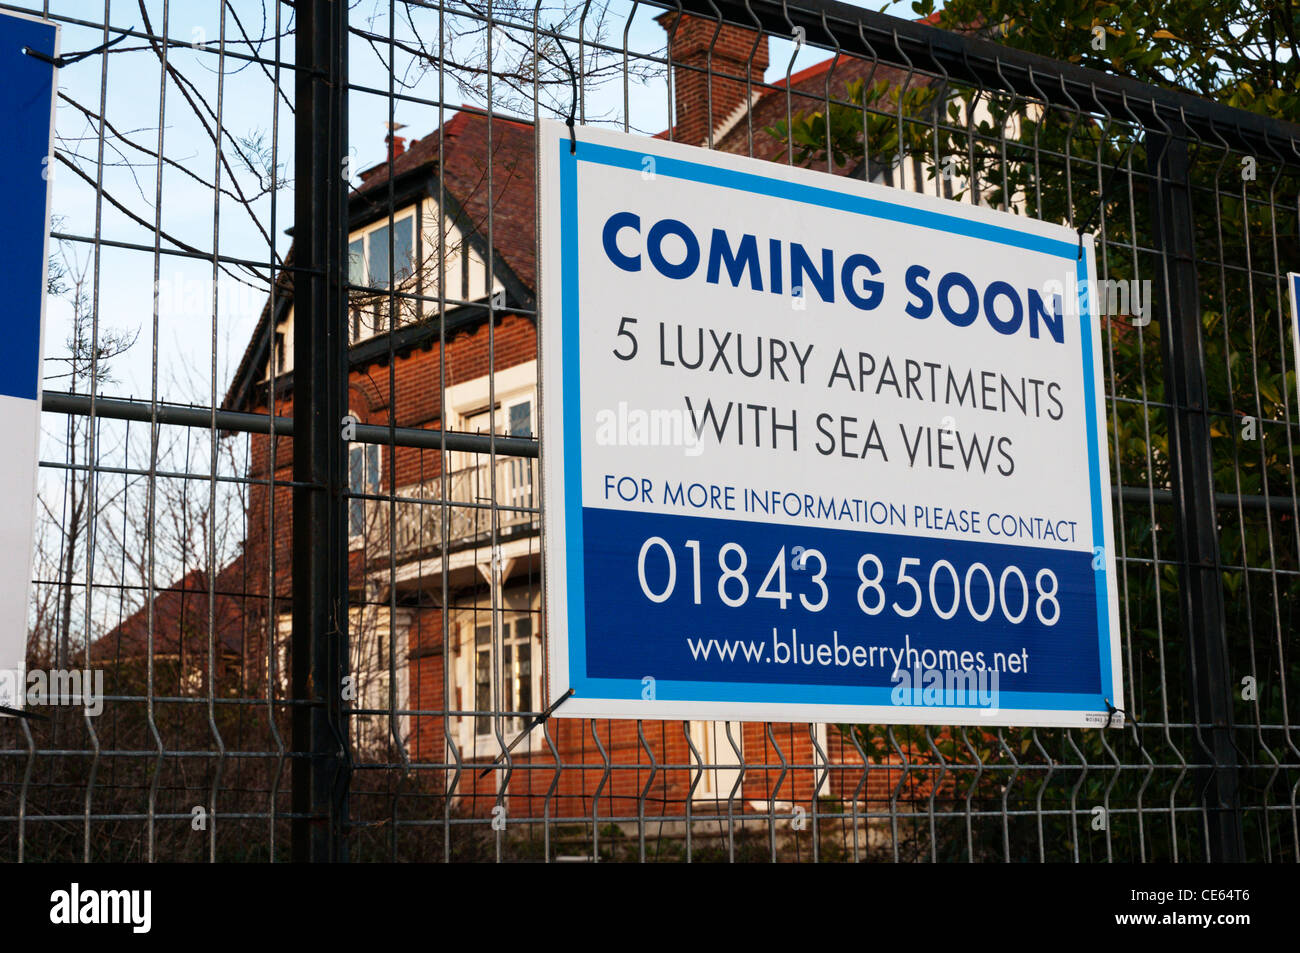 A large house is to be redeveloped as five luxury apartments. Stock Photo